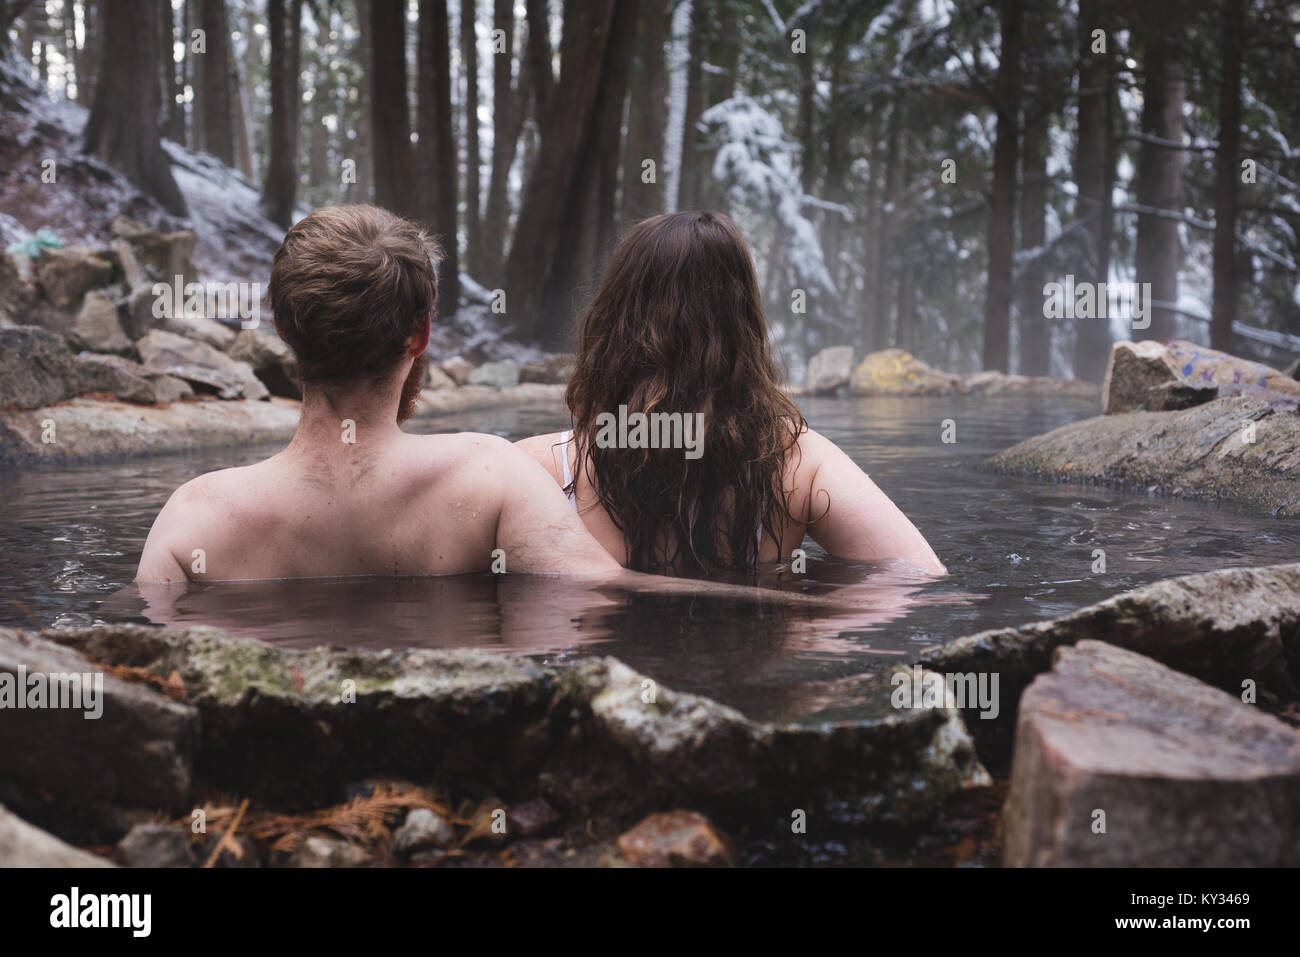 Rear view of couple relaxing in hot spring Stock Photo